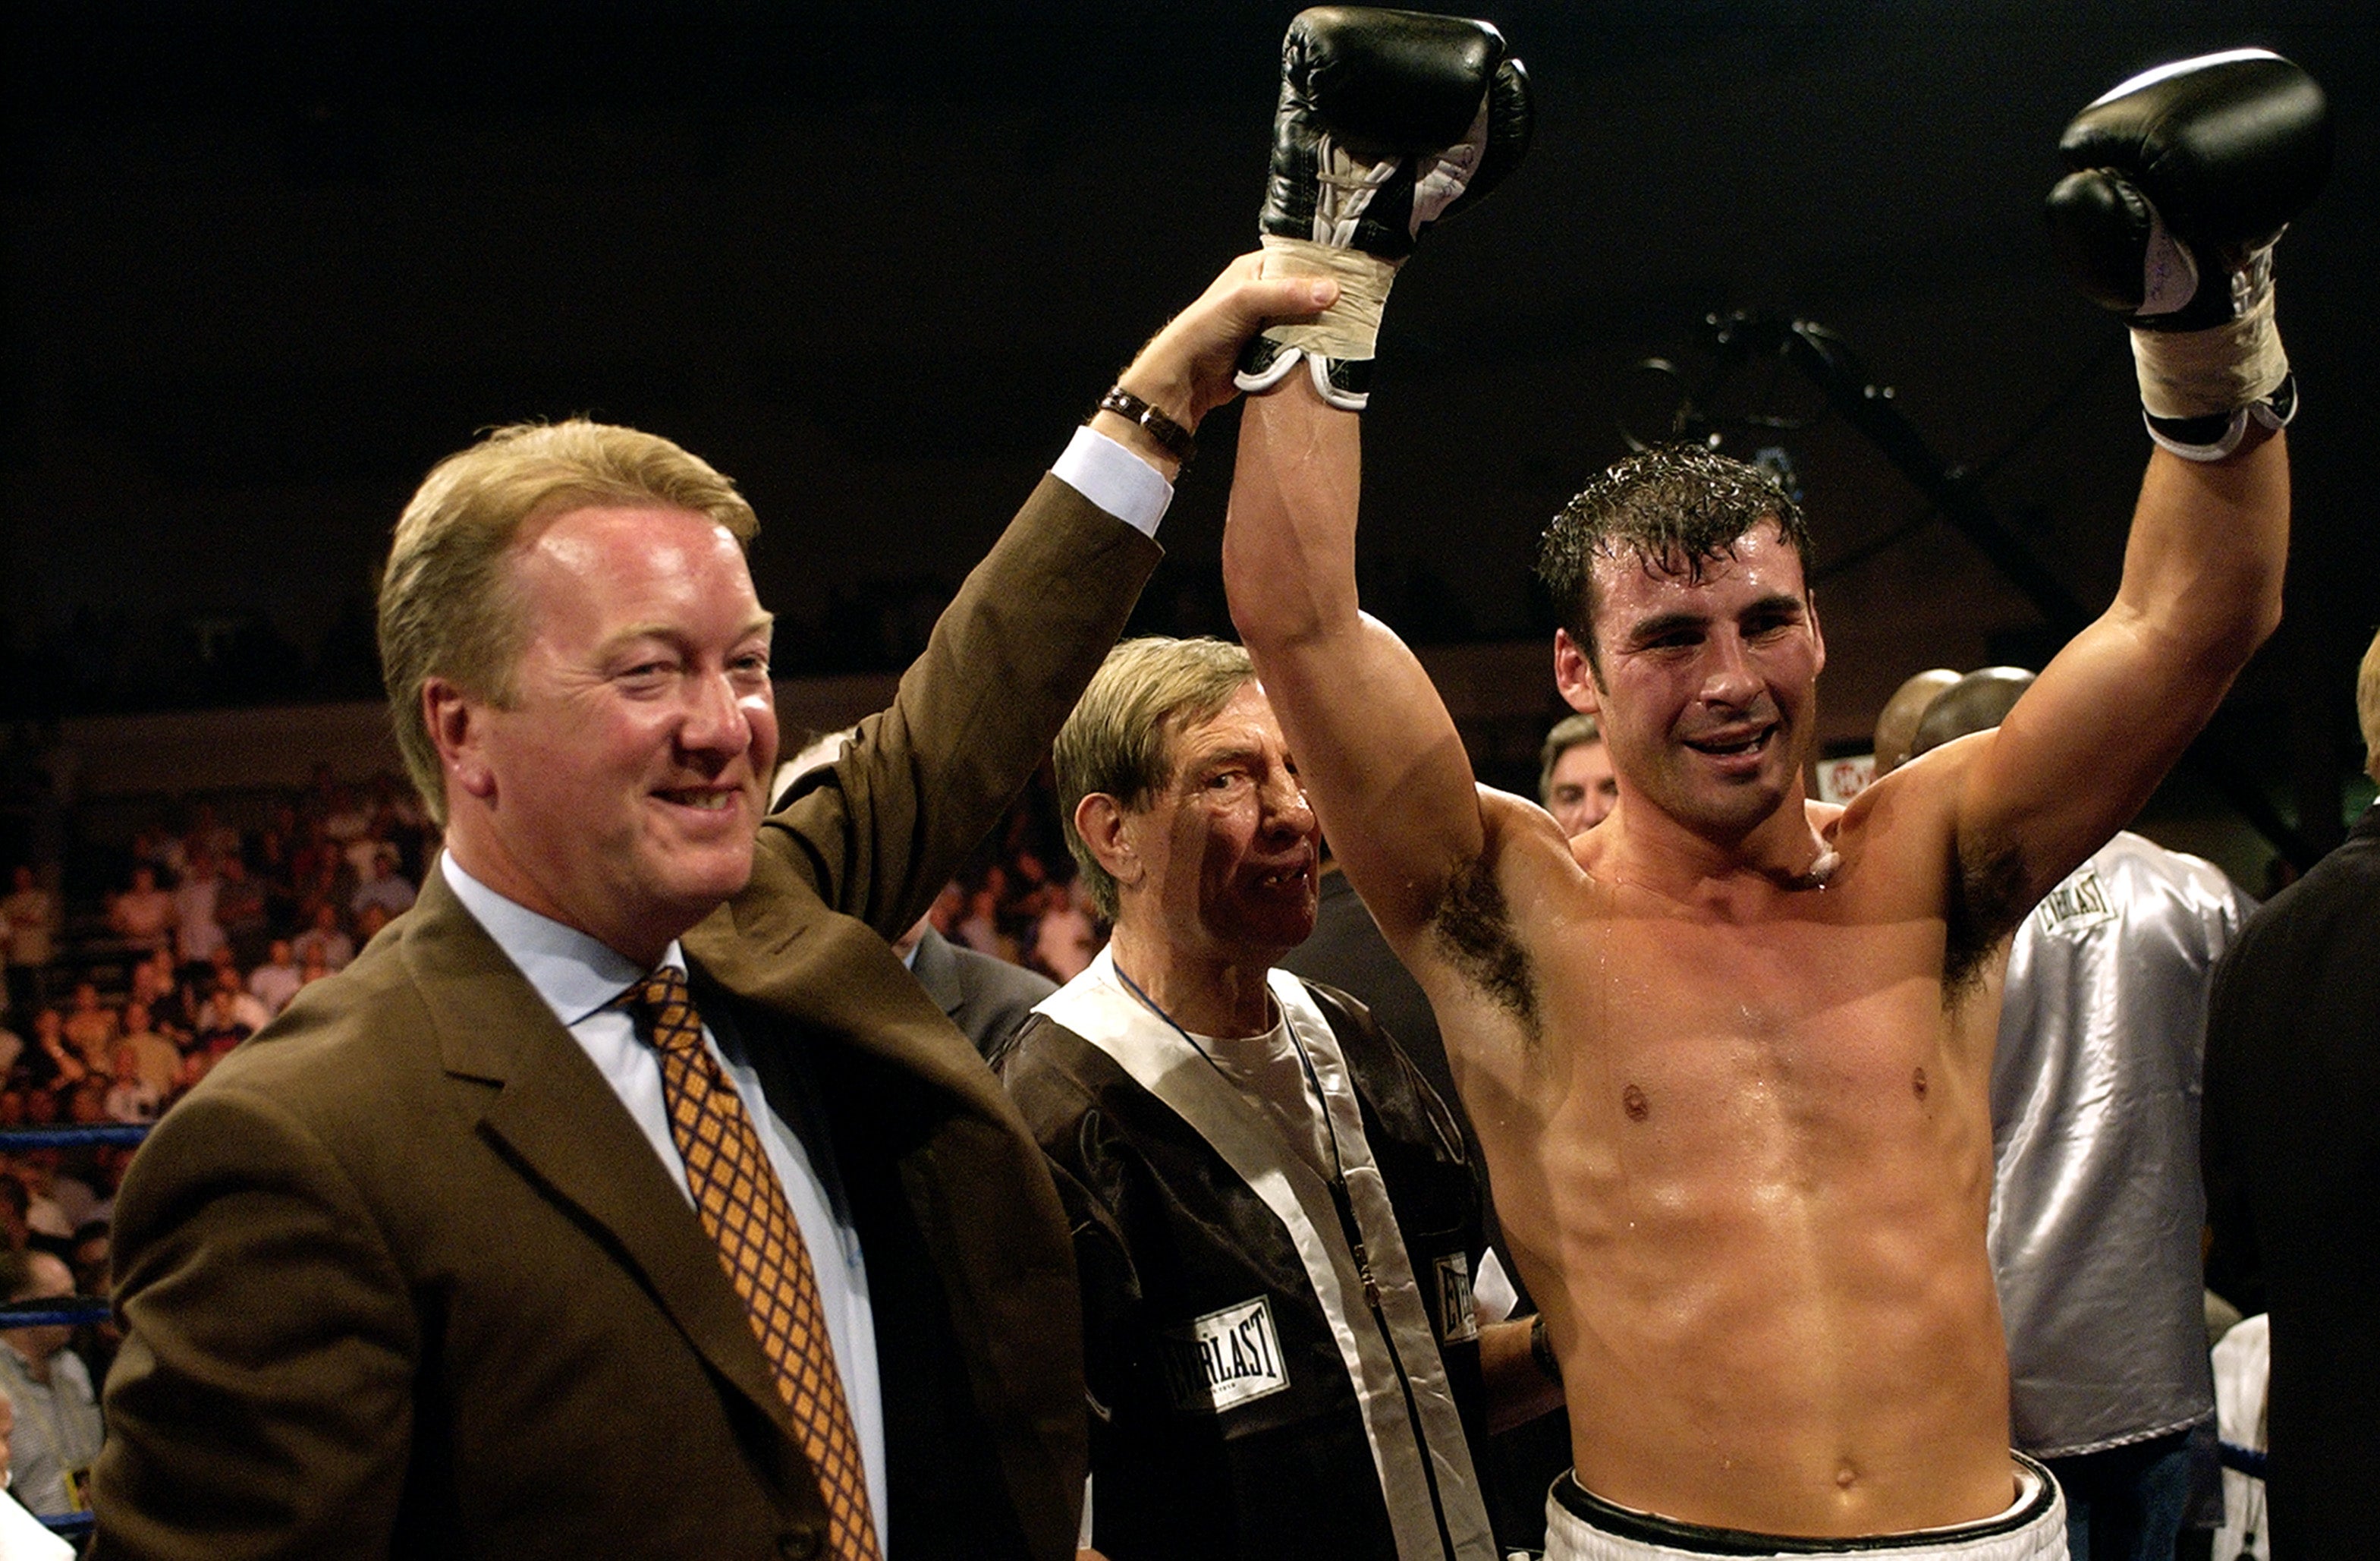 Warren with Welsh boxing icon Joe Calzaghe in 2003